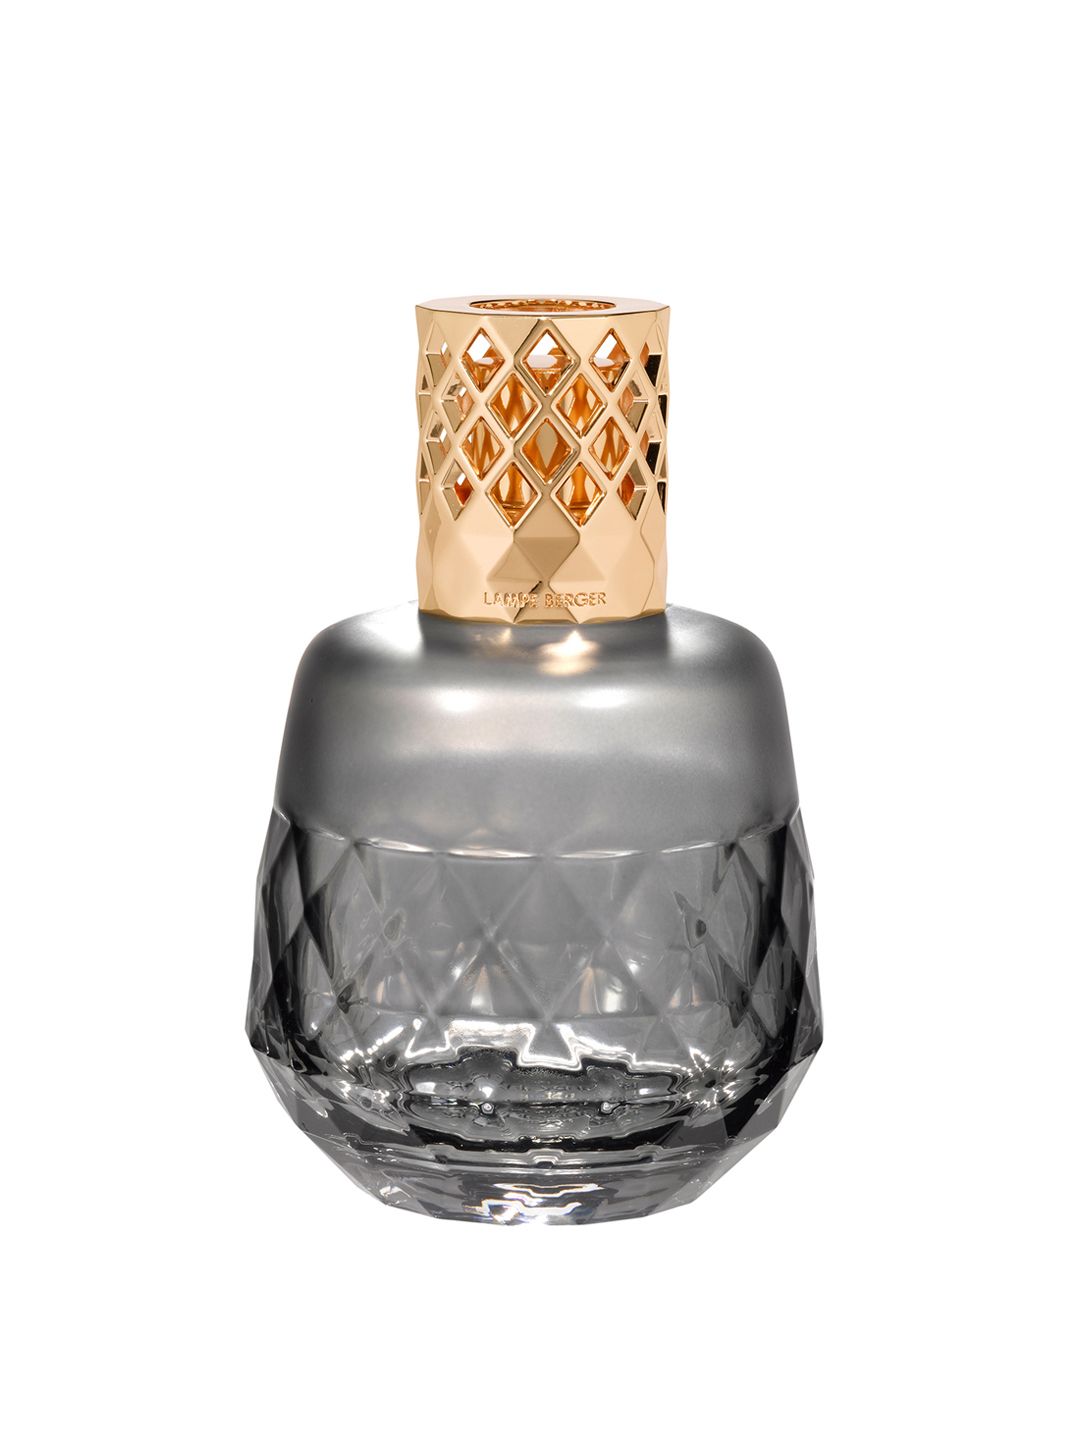 MAISON BERGER Grey & Gold-Toned Textured Glass Clarity Grise Aroma Oil Diffuser Price in India